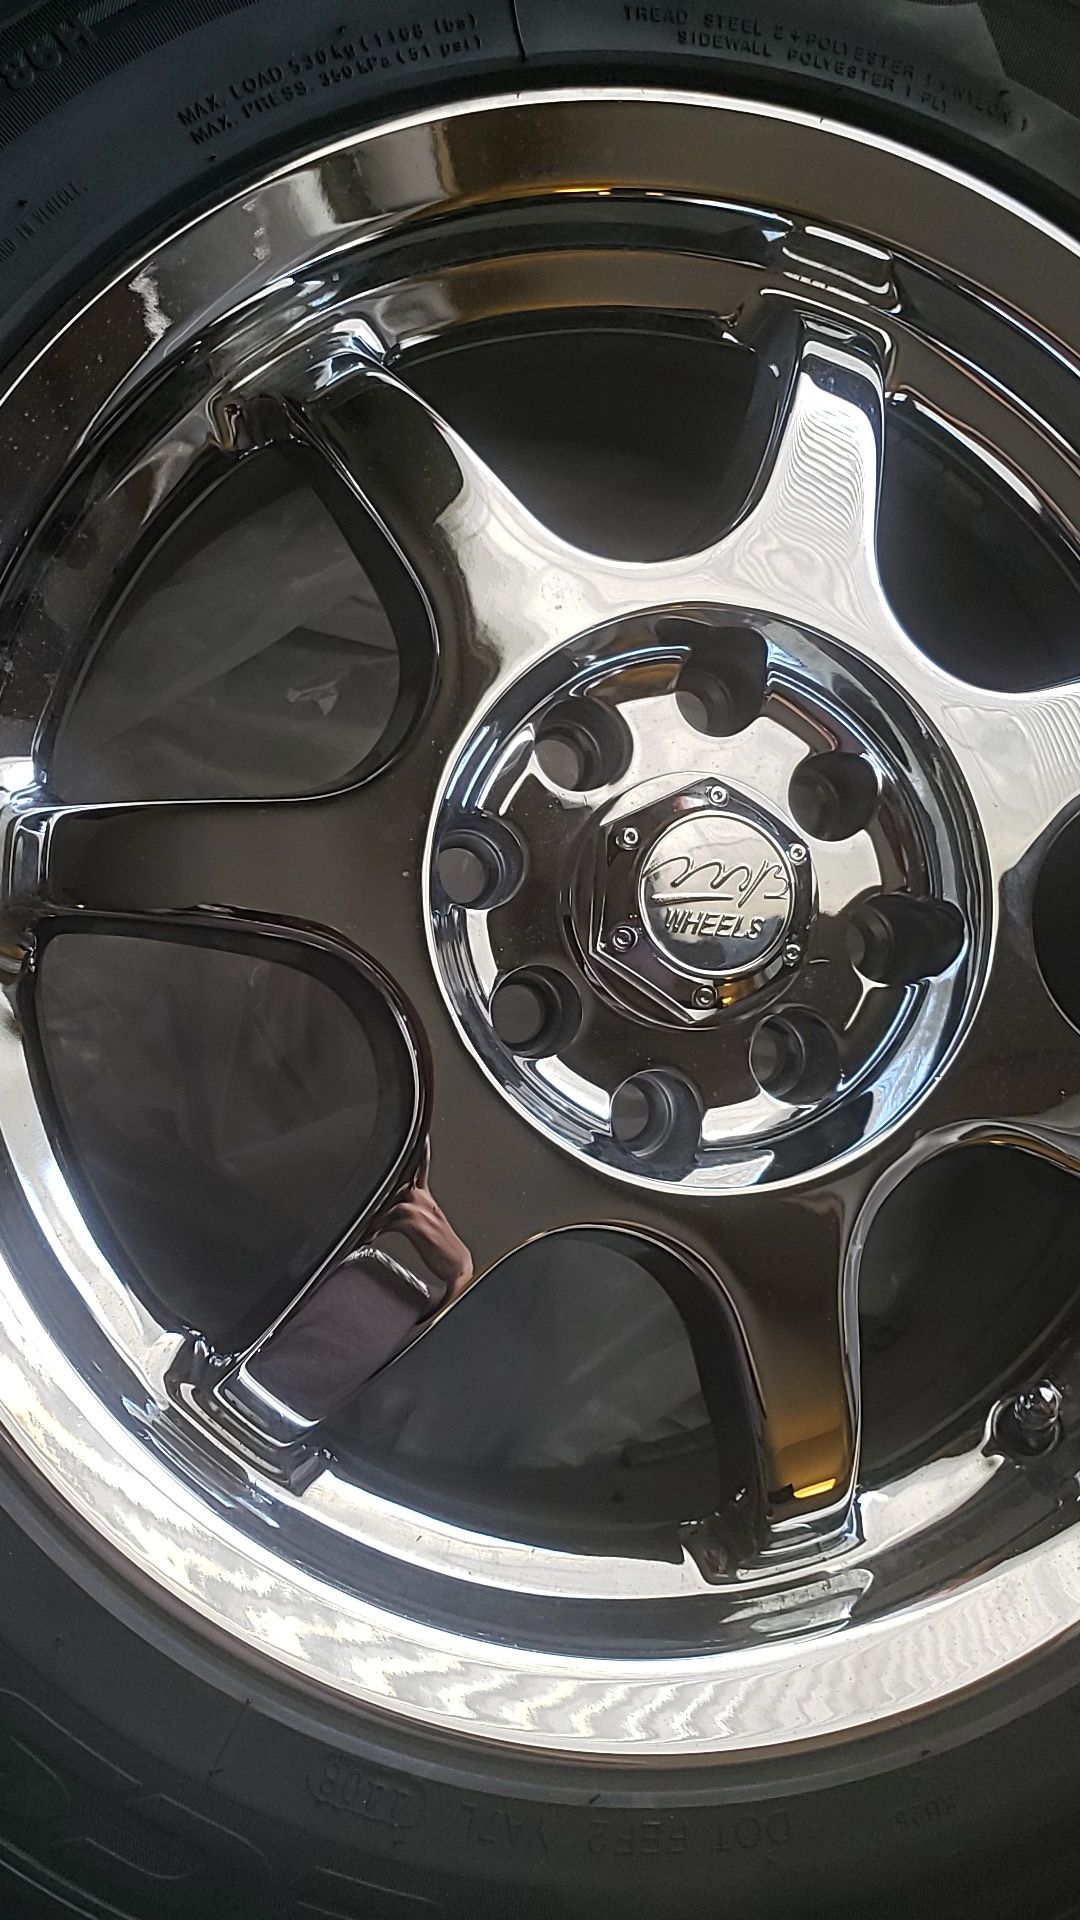 MB rims with tire